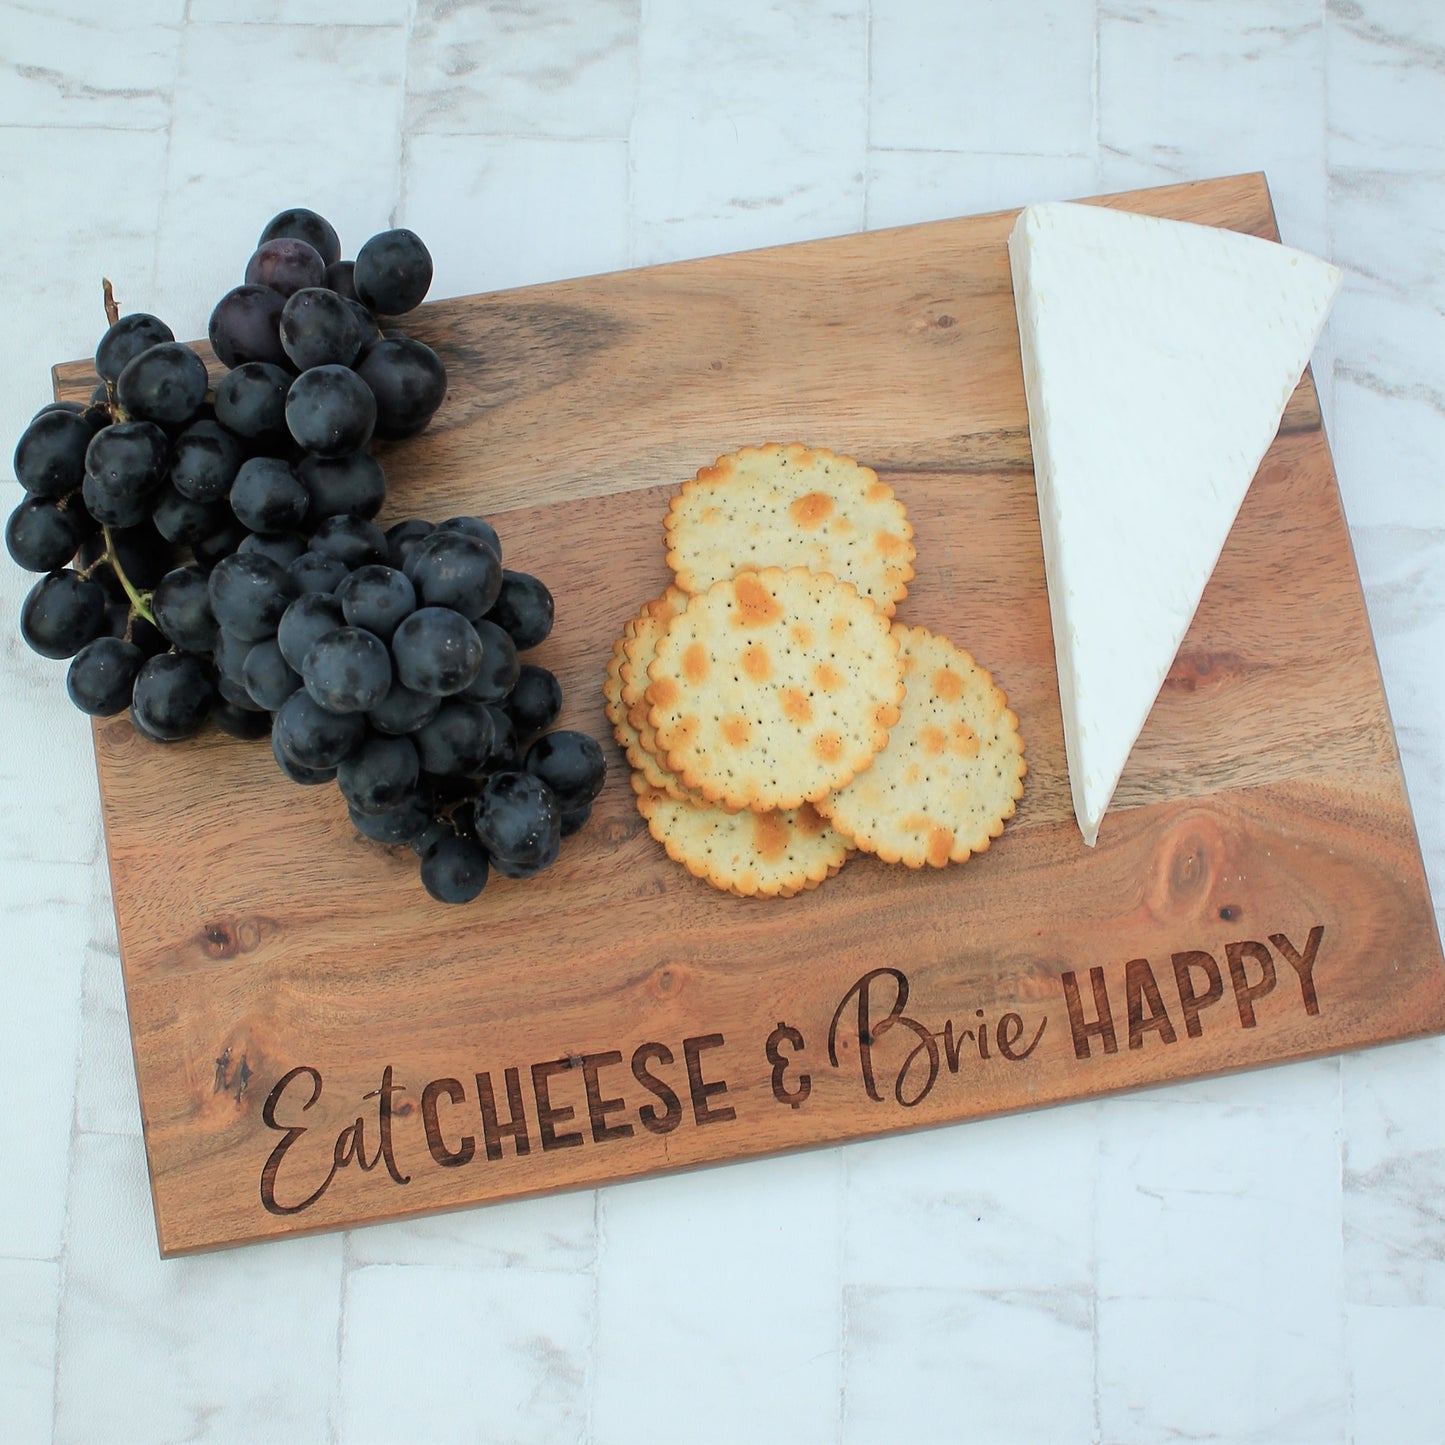 Wooden engraved chopping board with the words eat cheese and brie happy. With brie, grapes and crackers on top